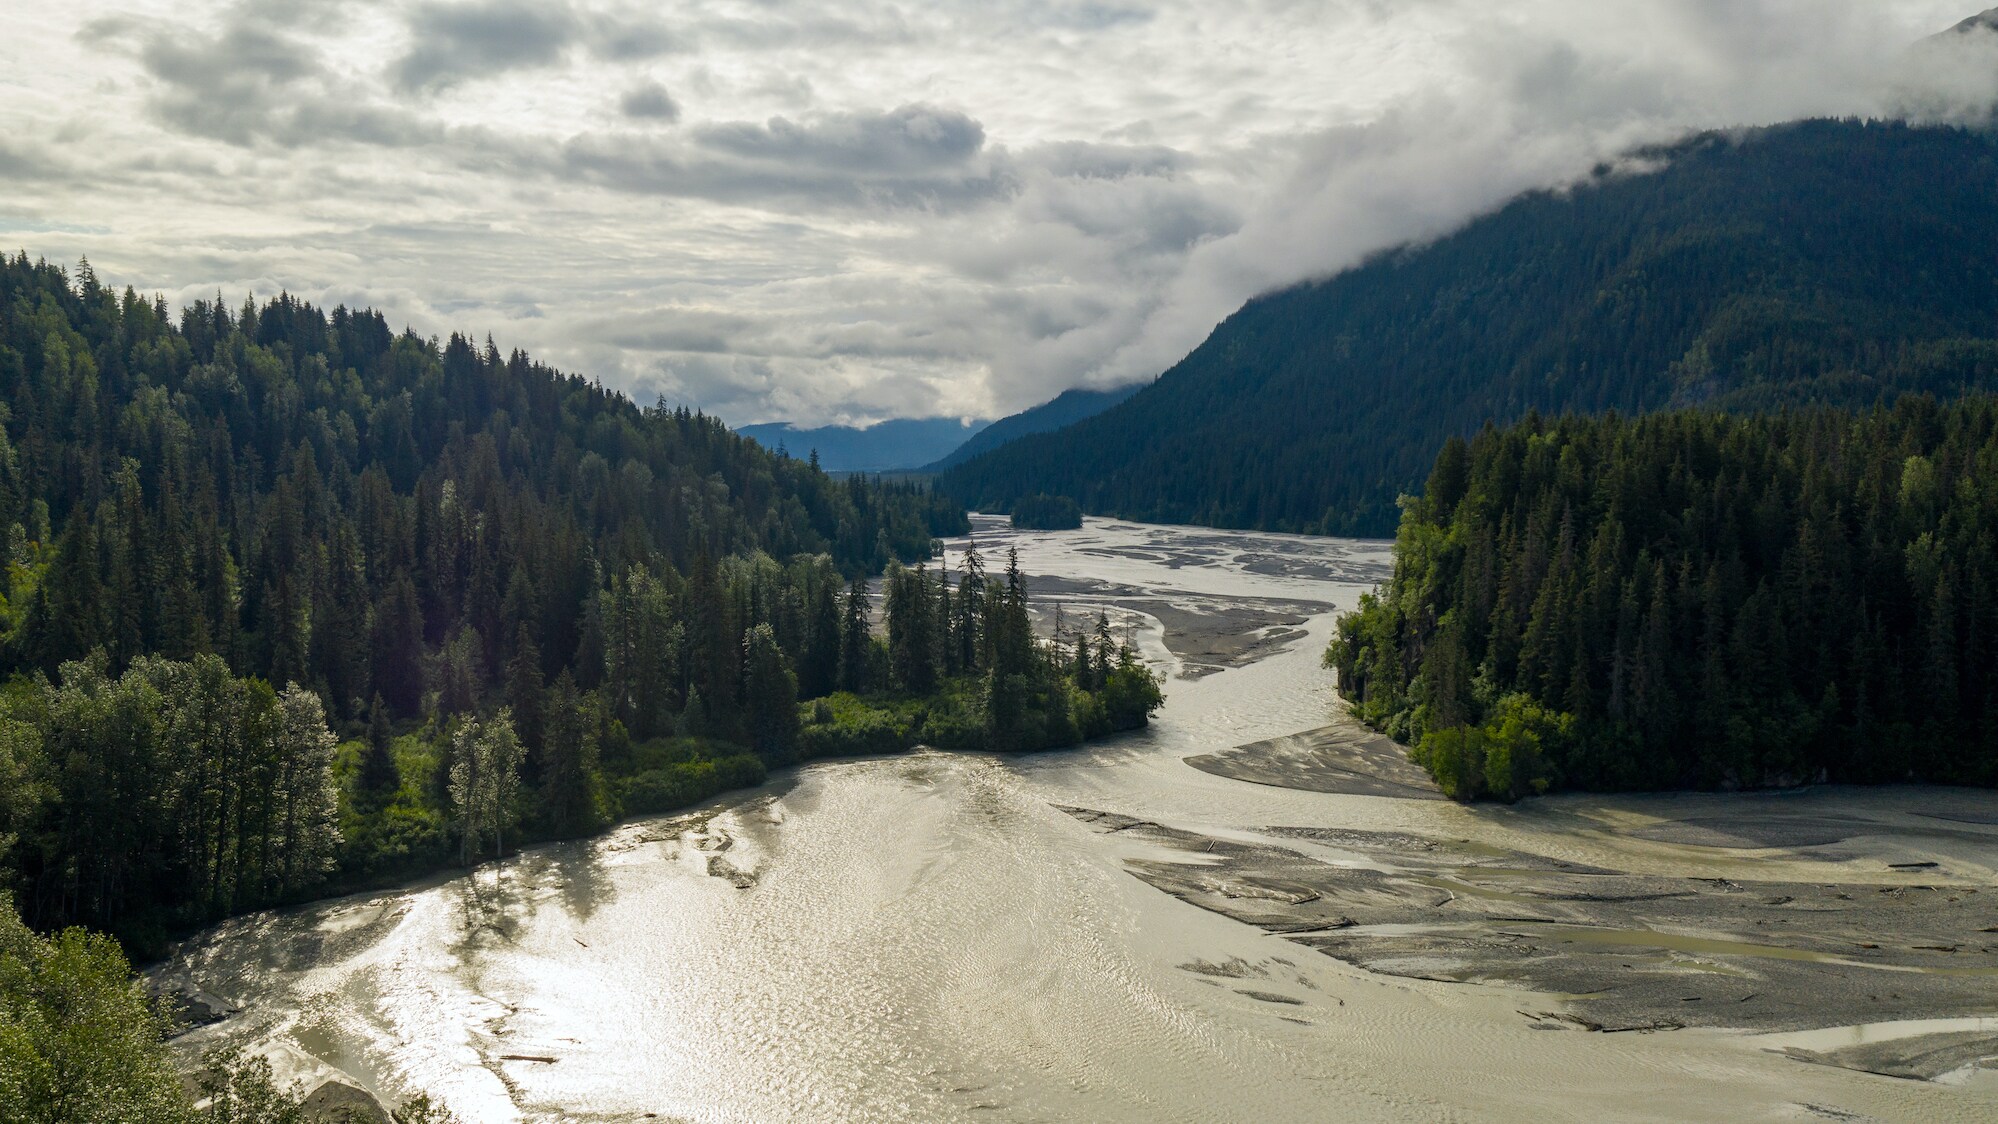 The Tsirku river as it enters the Alaskan rainforest.  (National Geographic for Disney+/Oliver Richards)